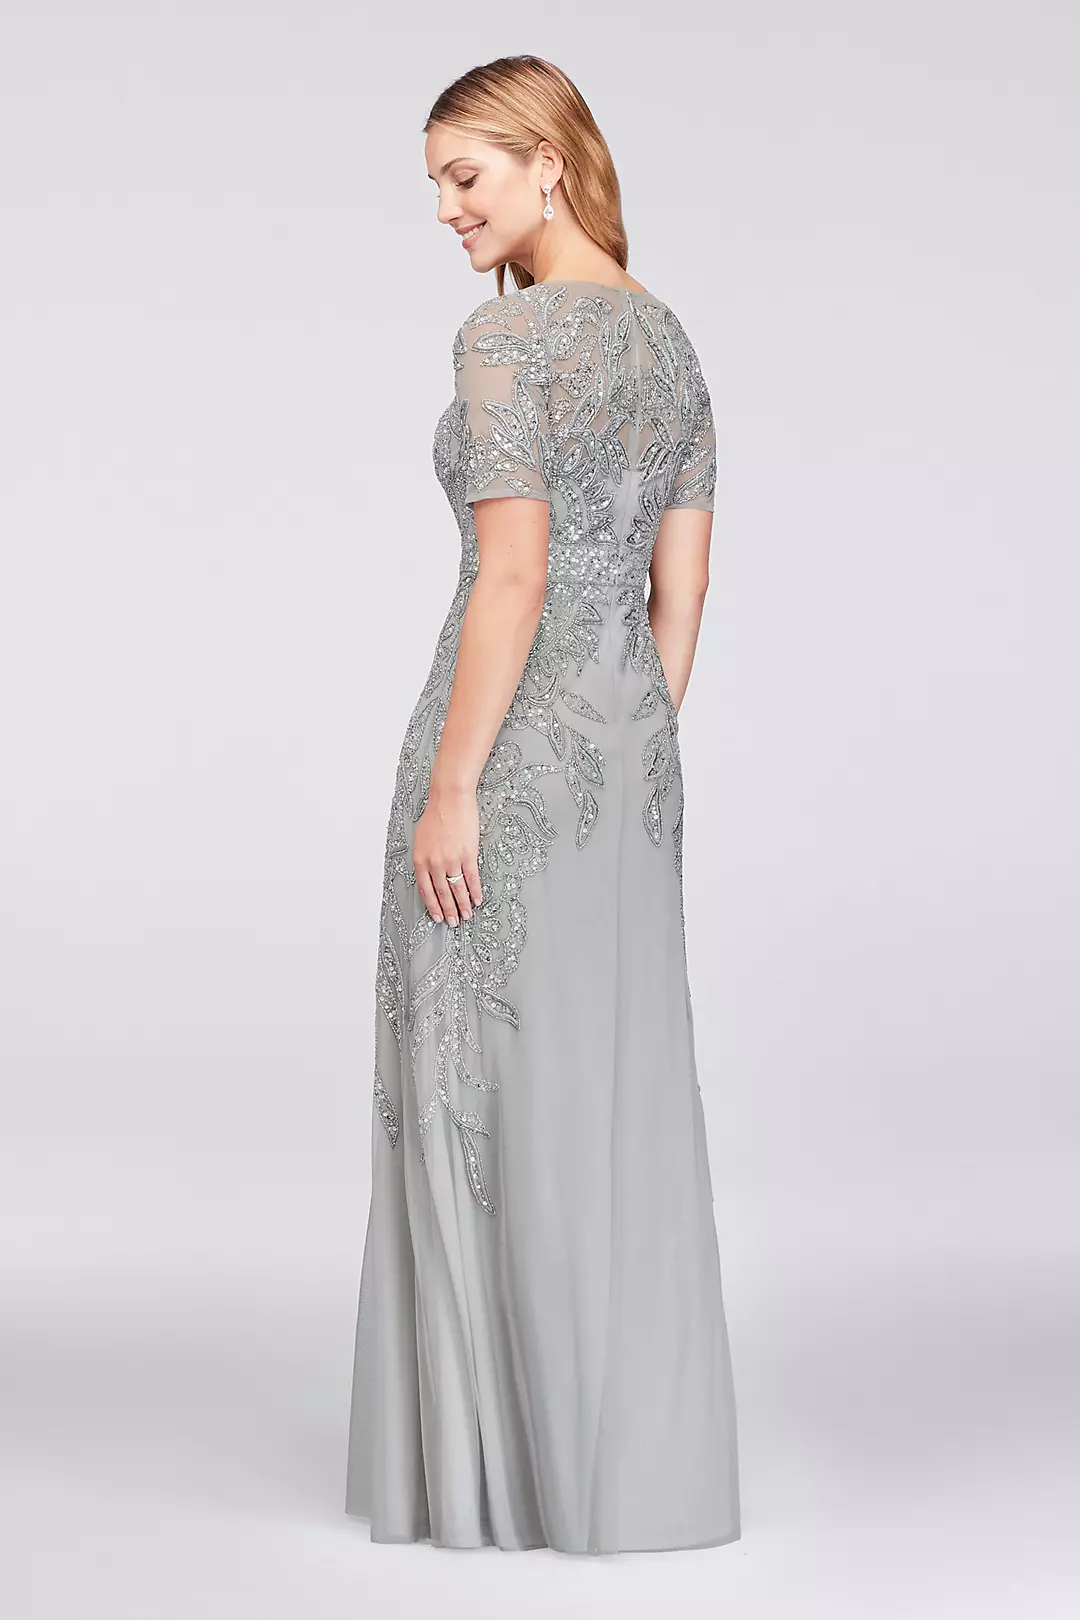 Vine-Beaded Mesh Gown with Elbow-Length Sleeves Image 2